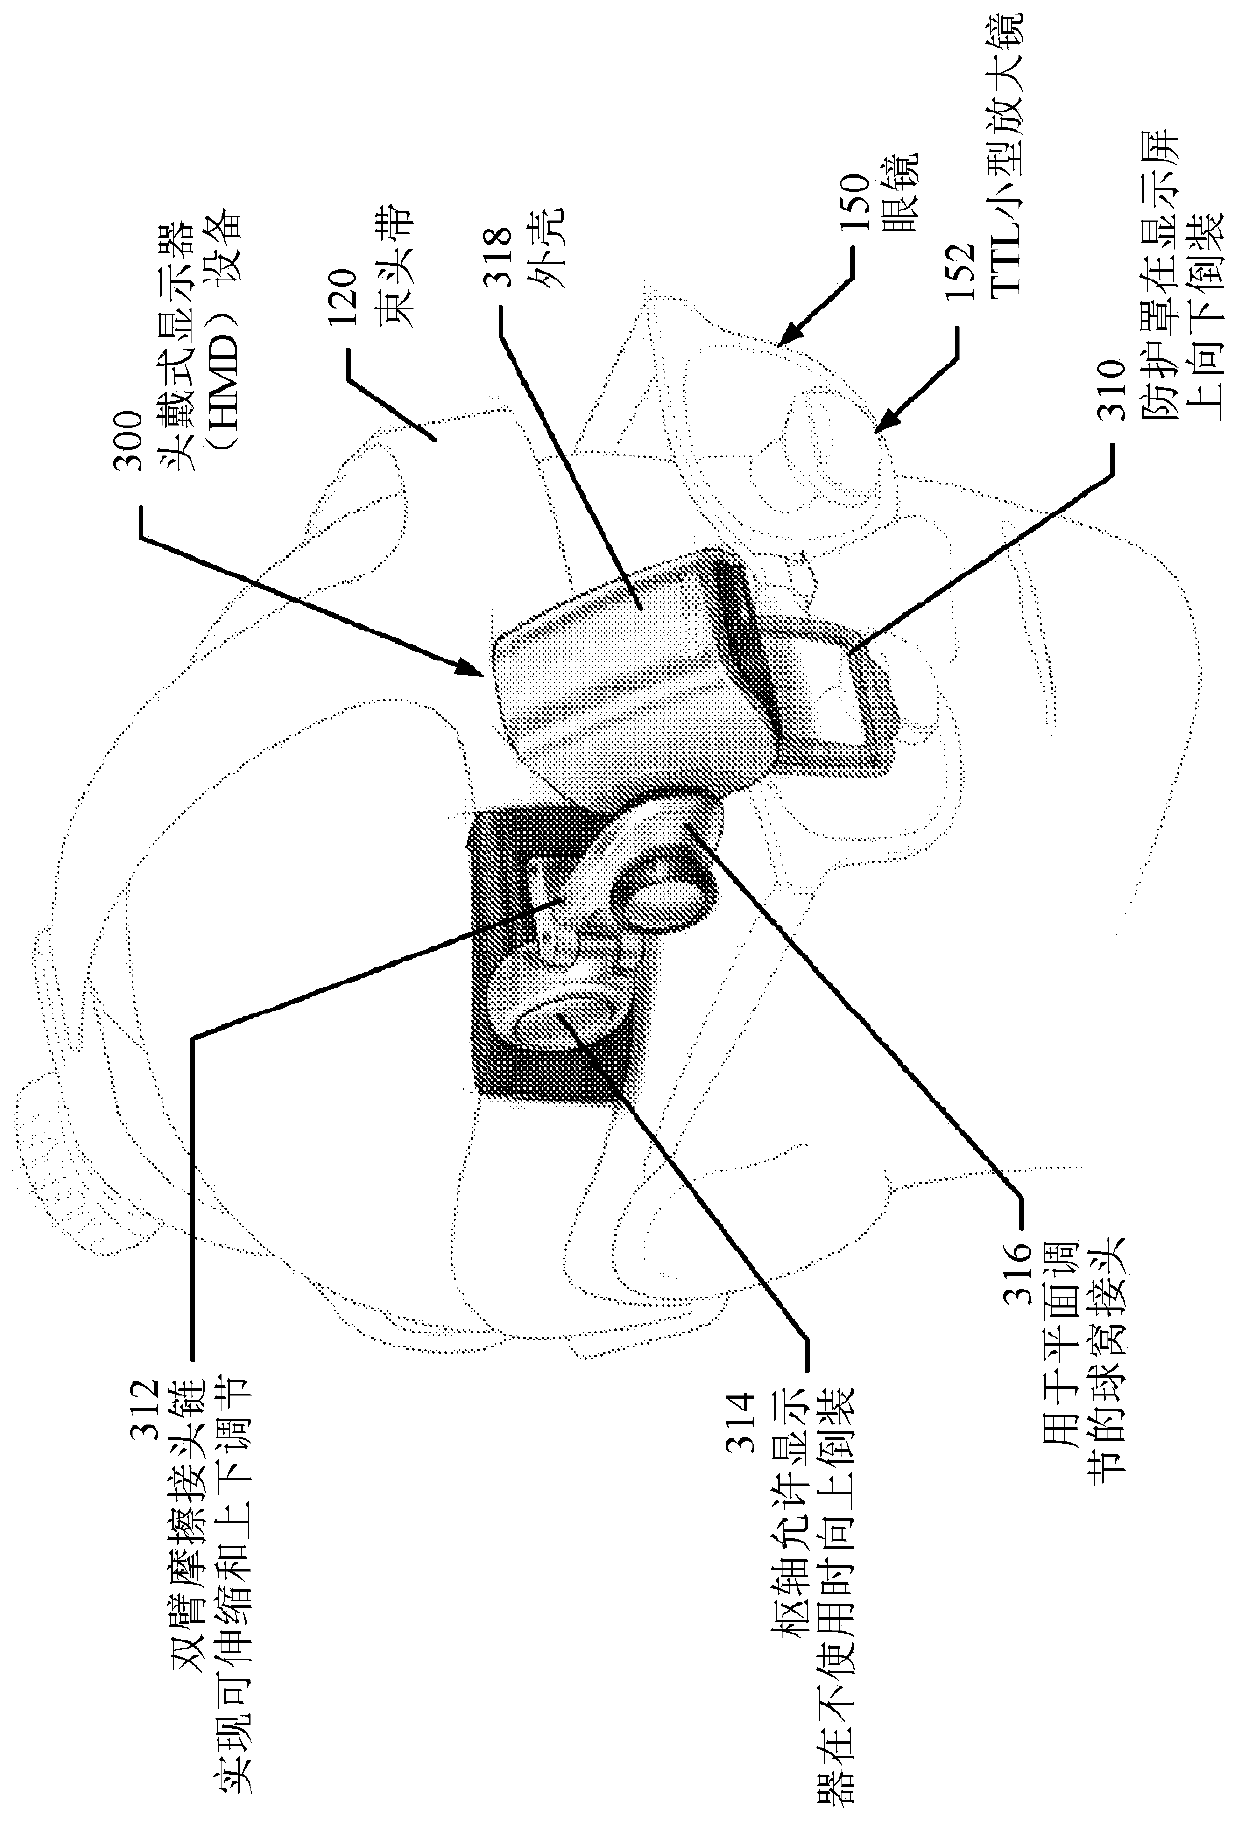 Augmented reality navigation systems for use with robotic surgical systems and methods of their use